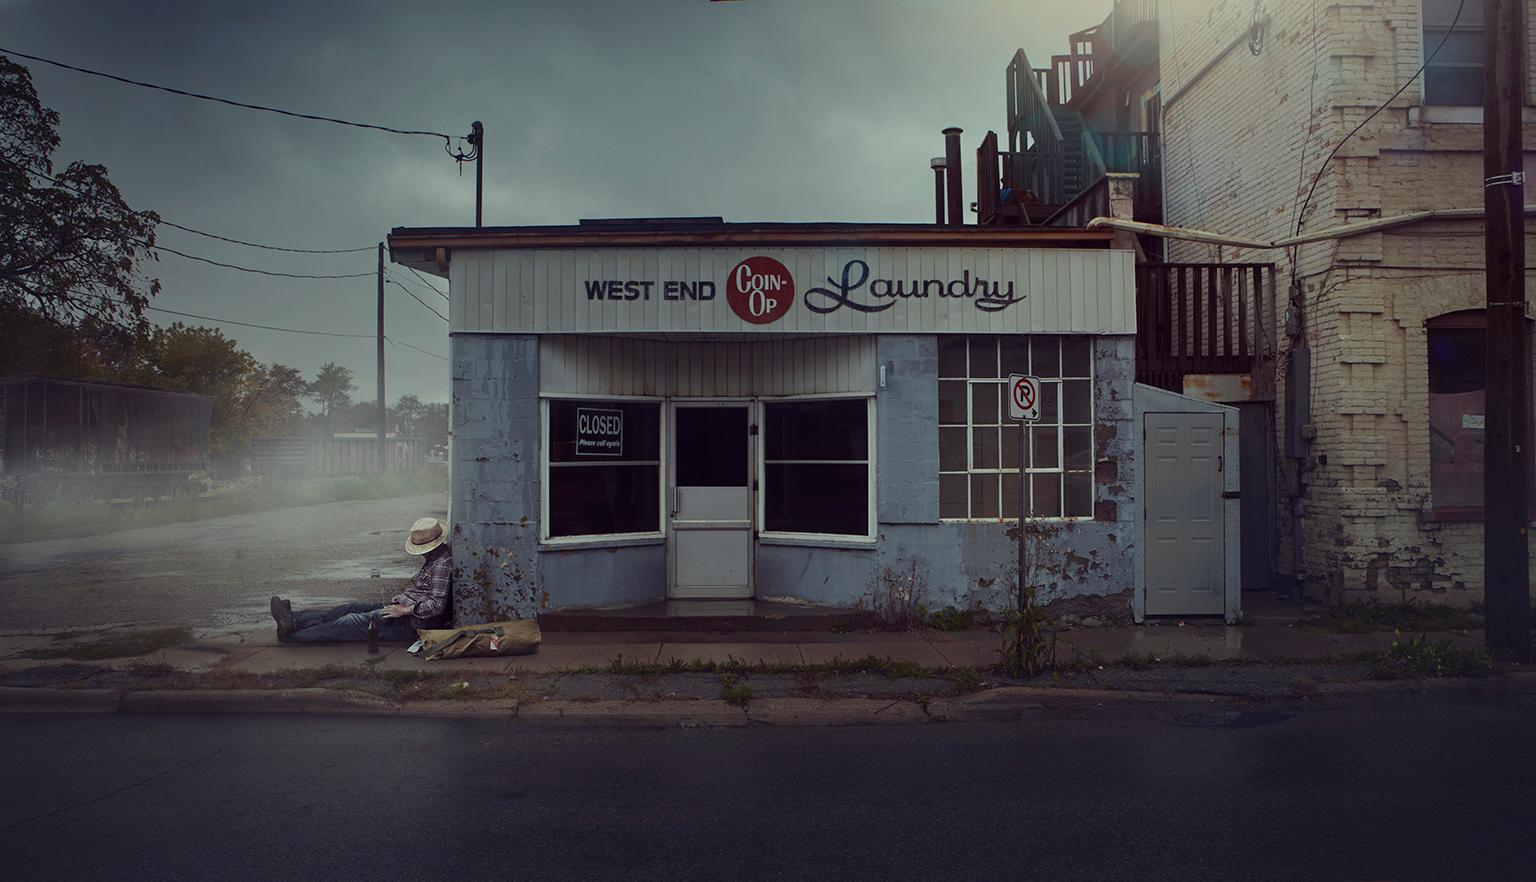 “Weary Hobo”, Ontario, Canada, 2009.
Archival Pigment Print, 40”X23”. Edition of 7.
Signed, Dated and Numbered on the Reverse.

Tyler Gray’s photographs are cinematic in their storytelling. They are those moments that transform and become completely